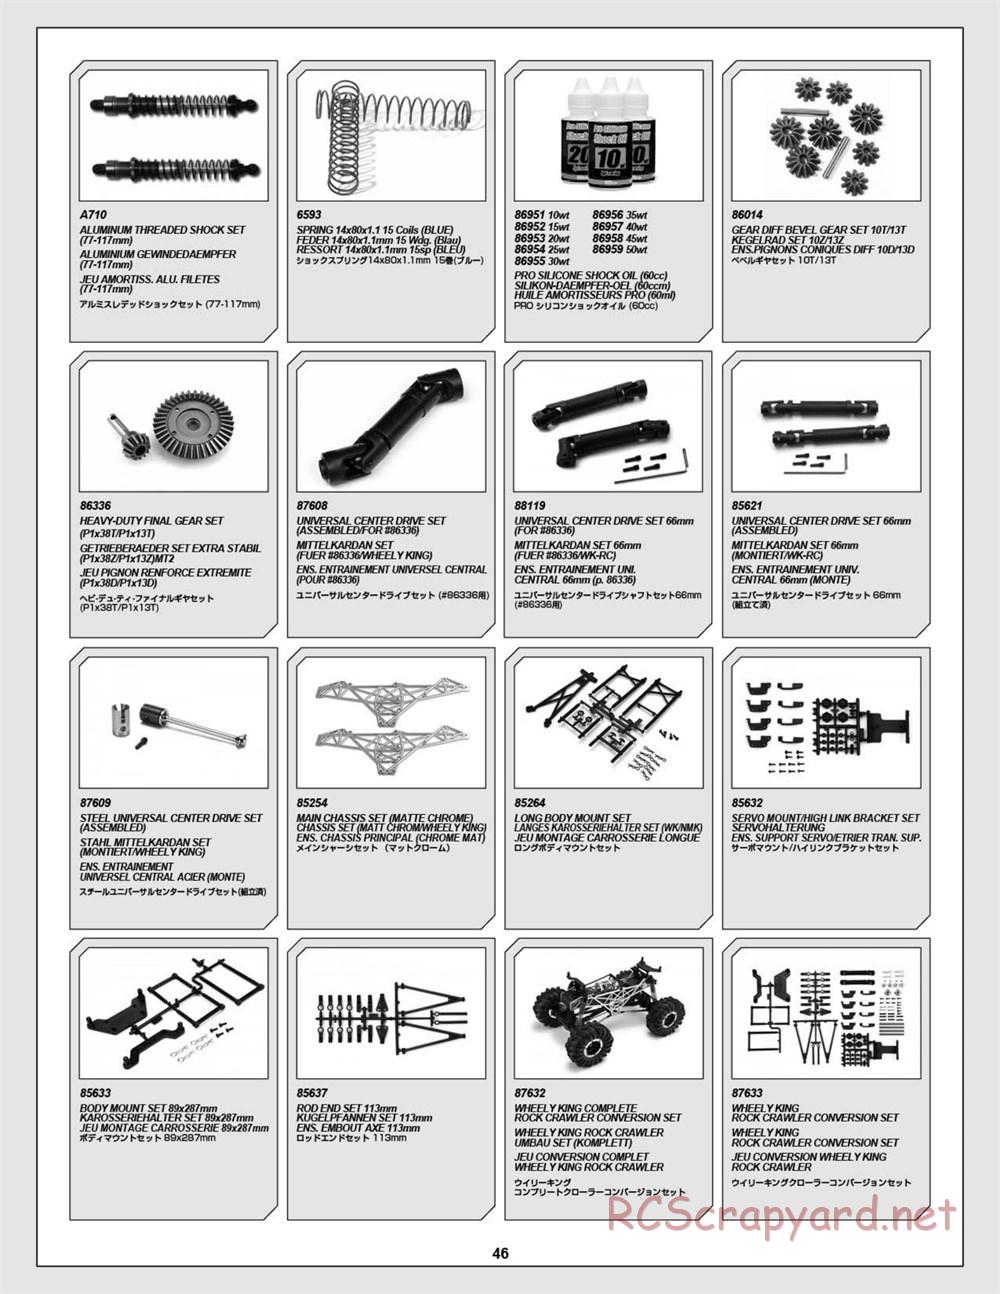 HPI - Wheely King 4x4 - Exploded View - Page 46